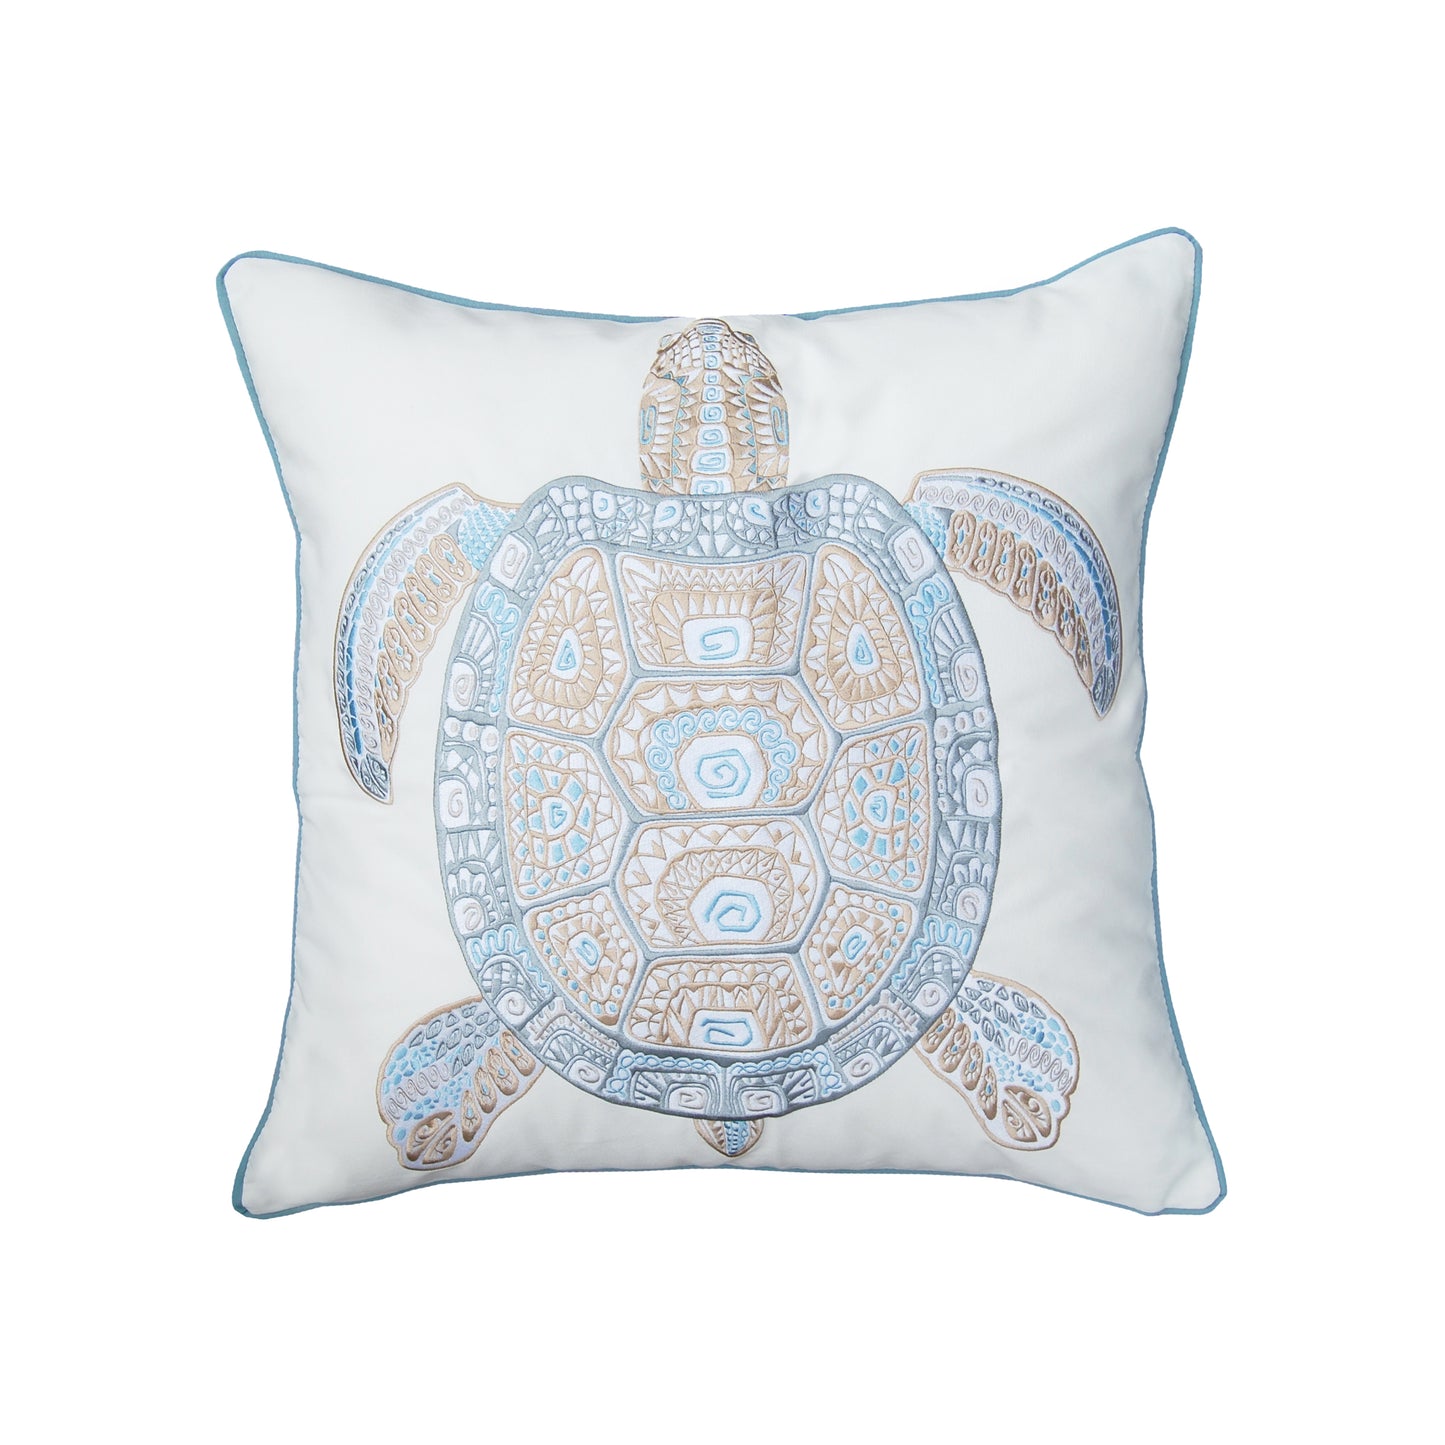 Large sea turtle featuring tribal geometric patterns embroidered on a white background. Pillow is finished with a blue piped edging.